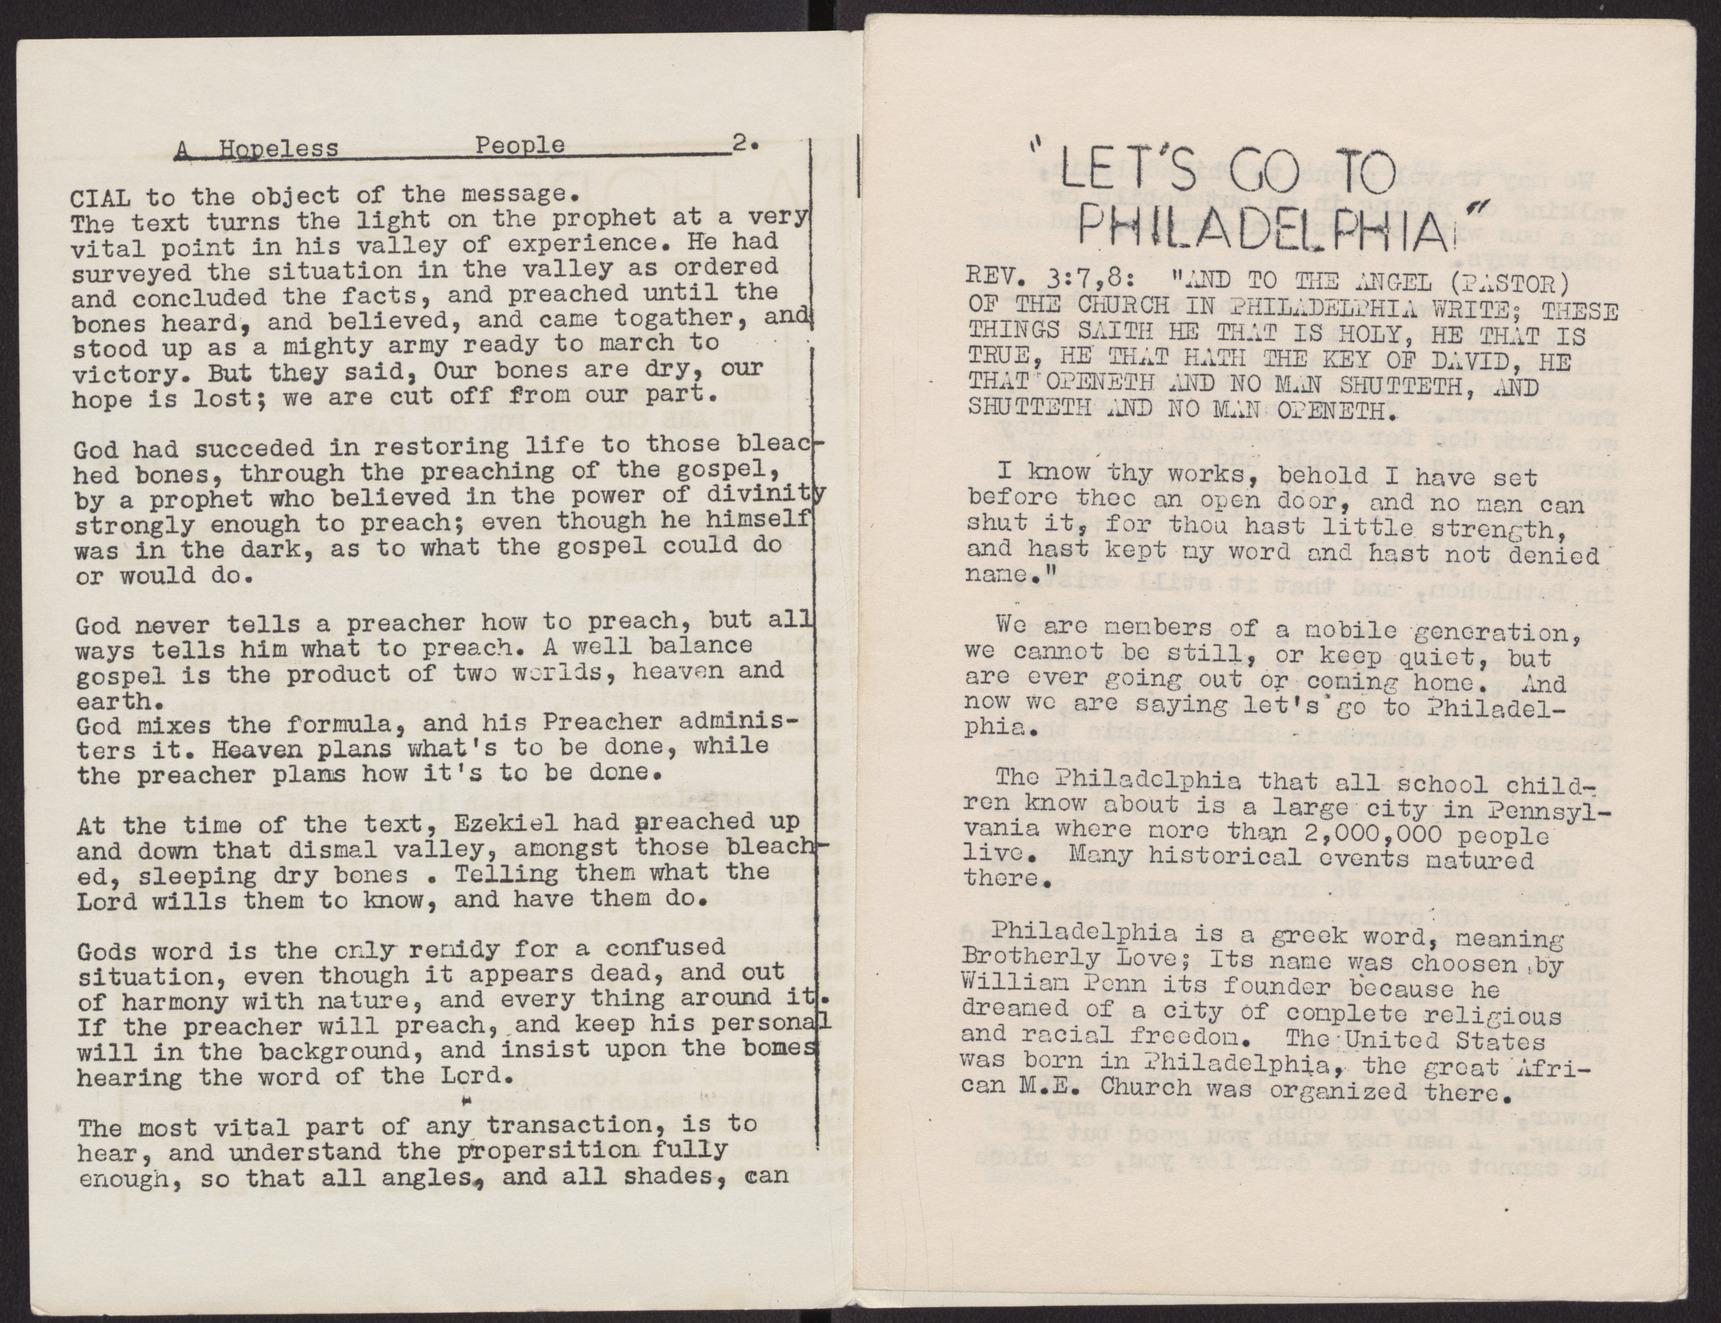 Pamphlet, A Hopeless People, no date, page 2